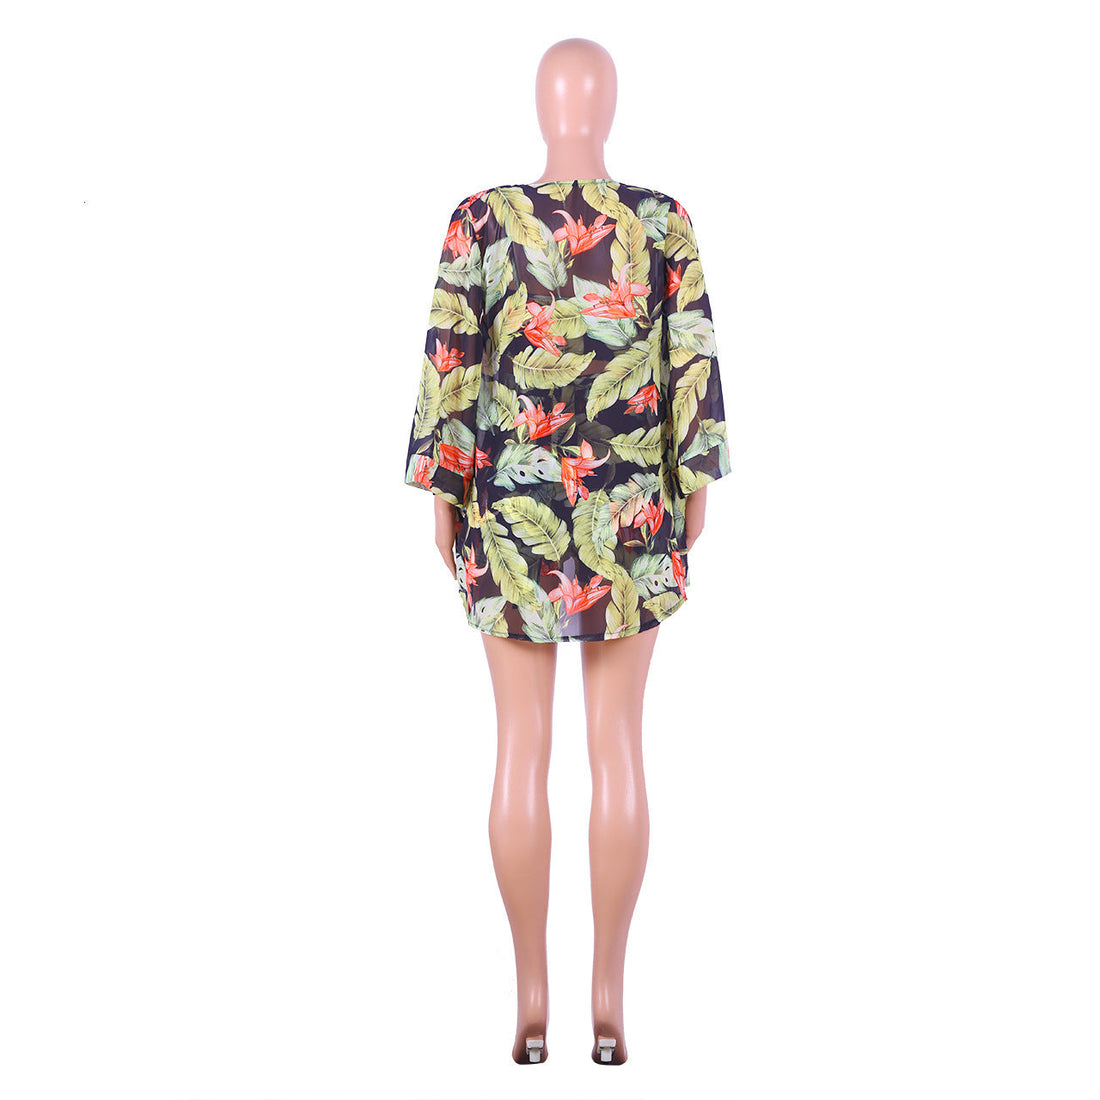 Women's Summer Spandex Floral Three-Piece Suit With Print